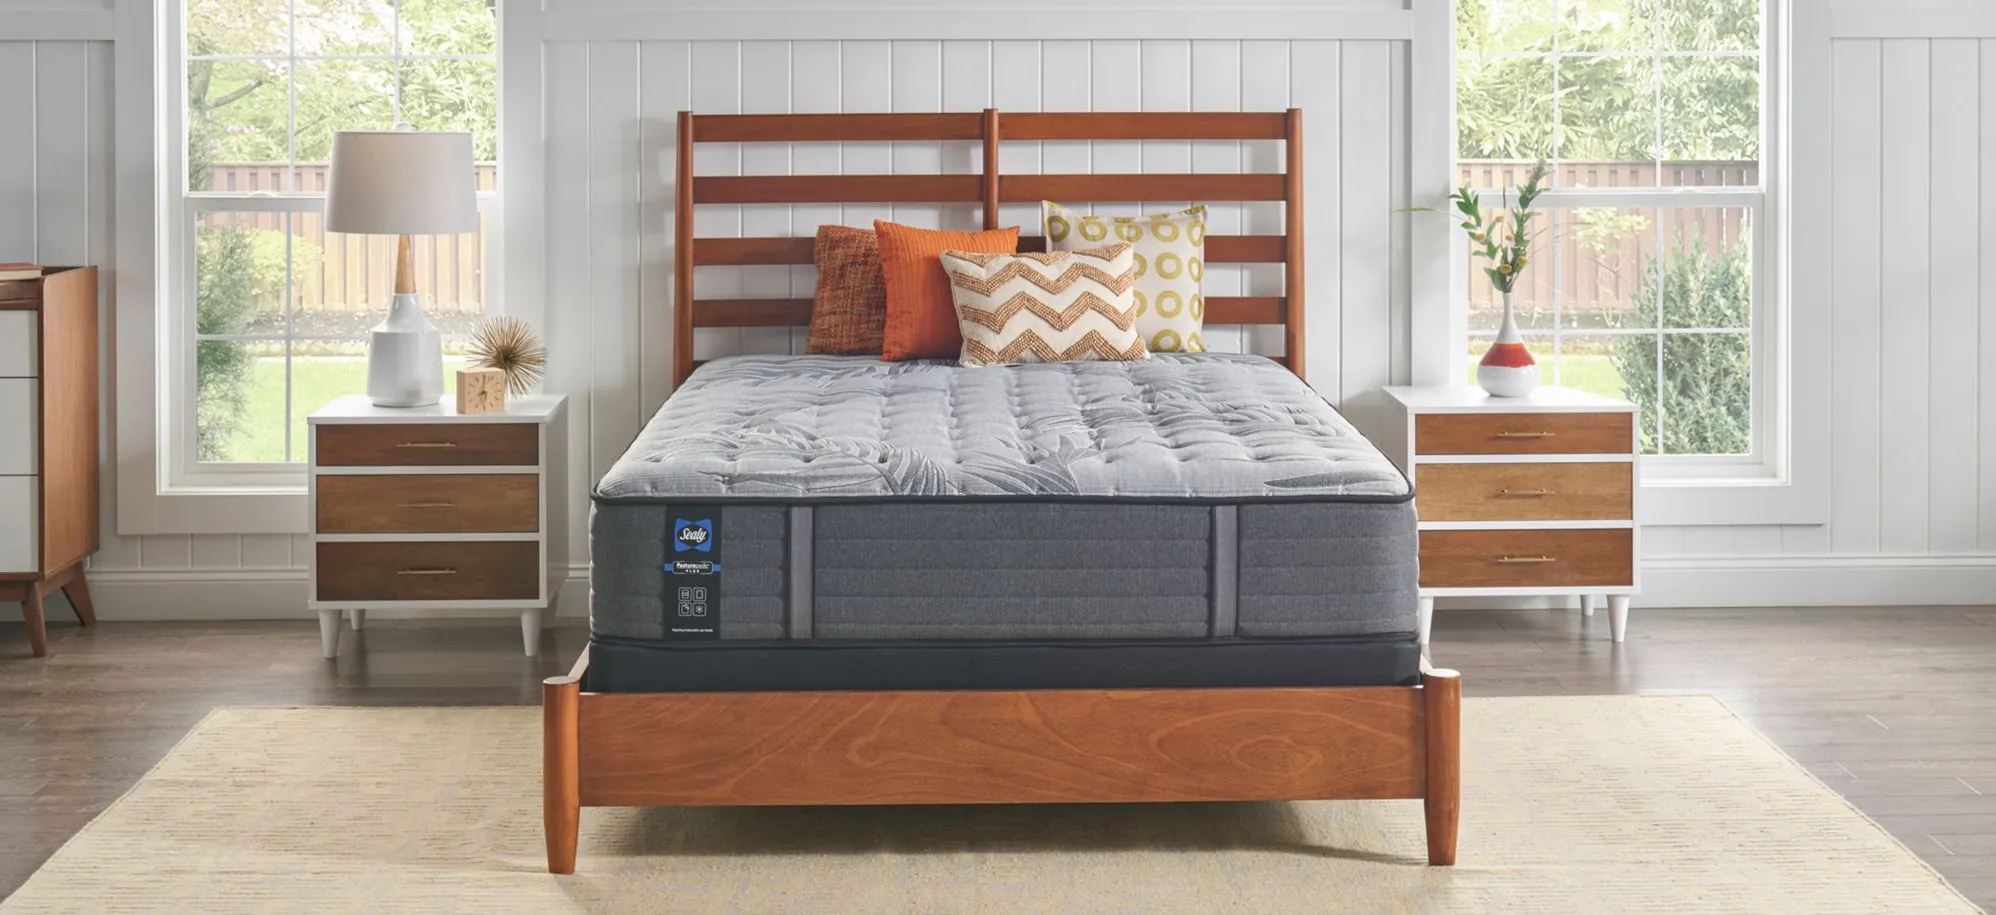 ma ys sealy posturpedic bethel heights firm mattress